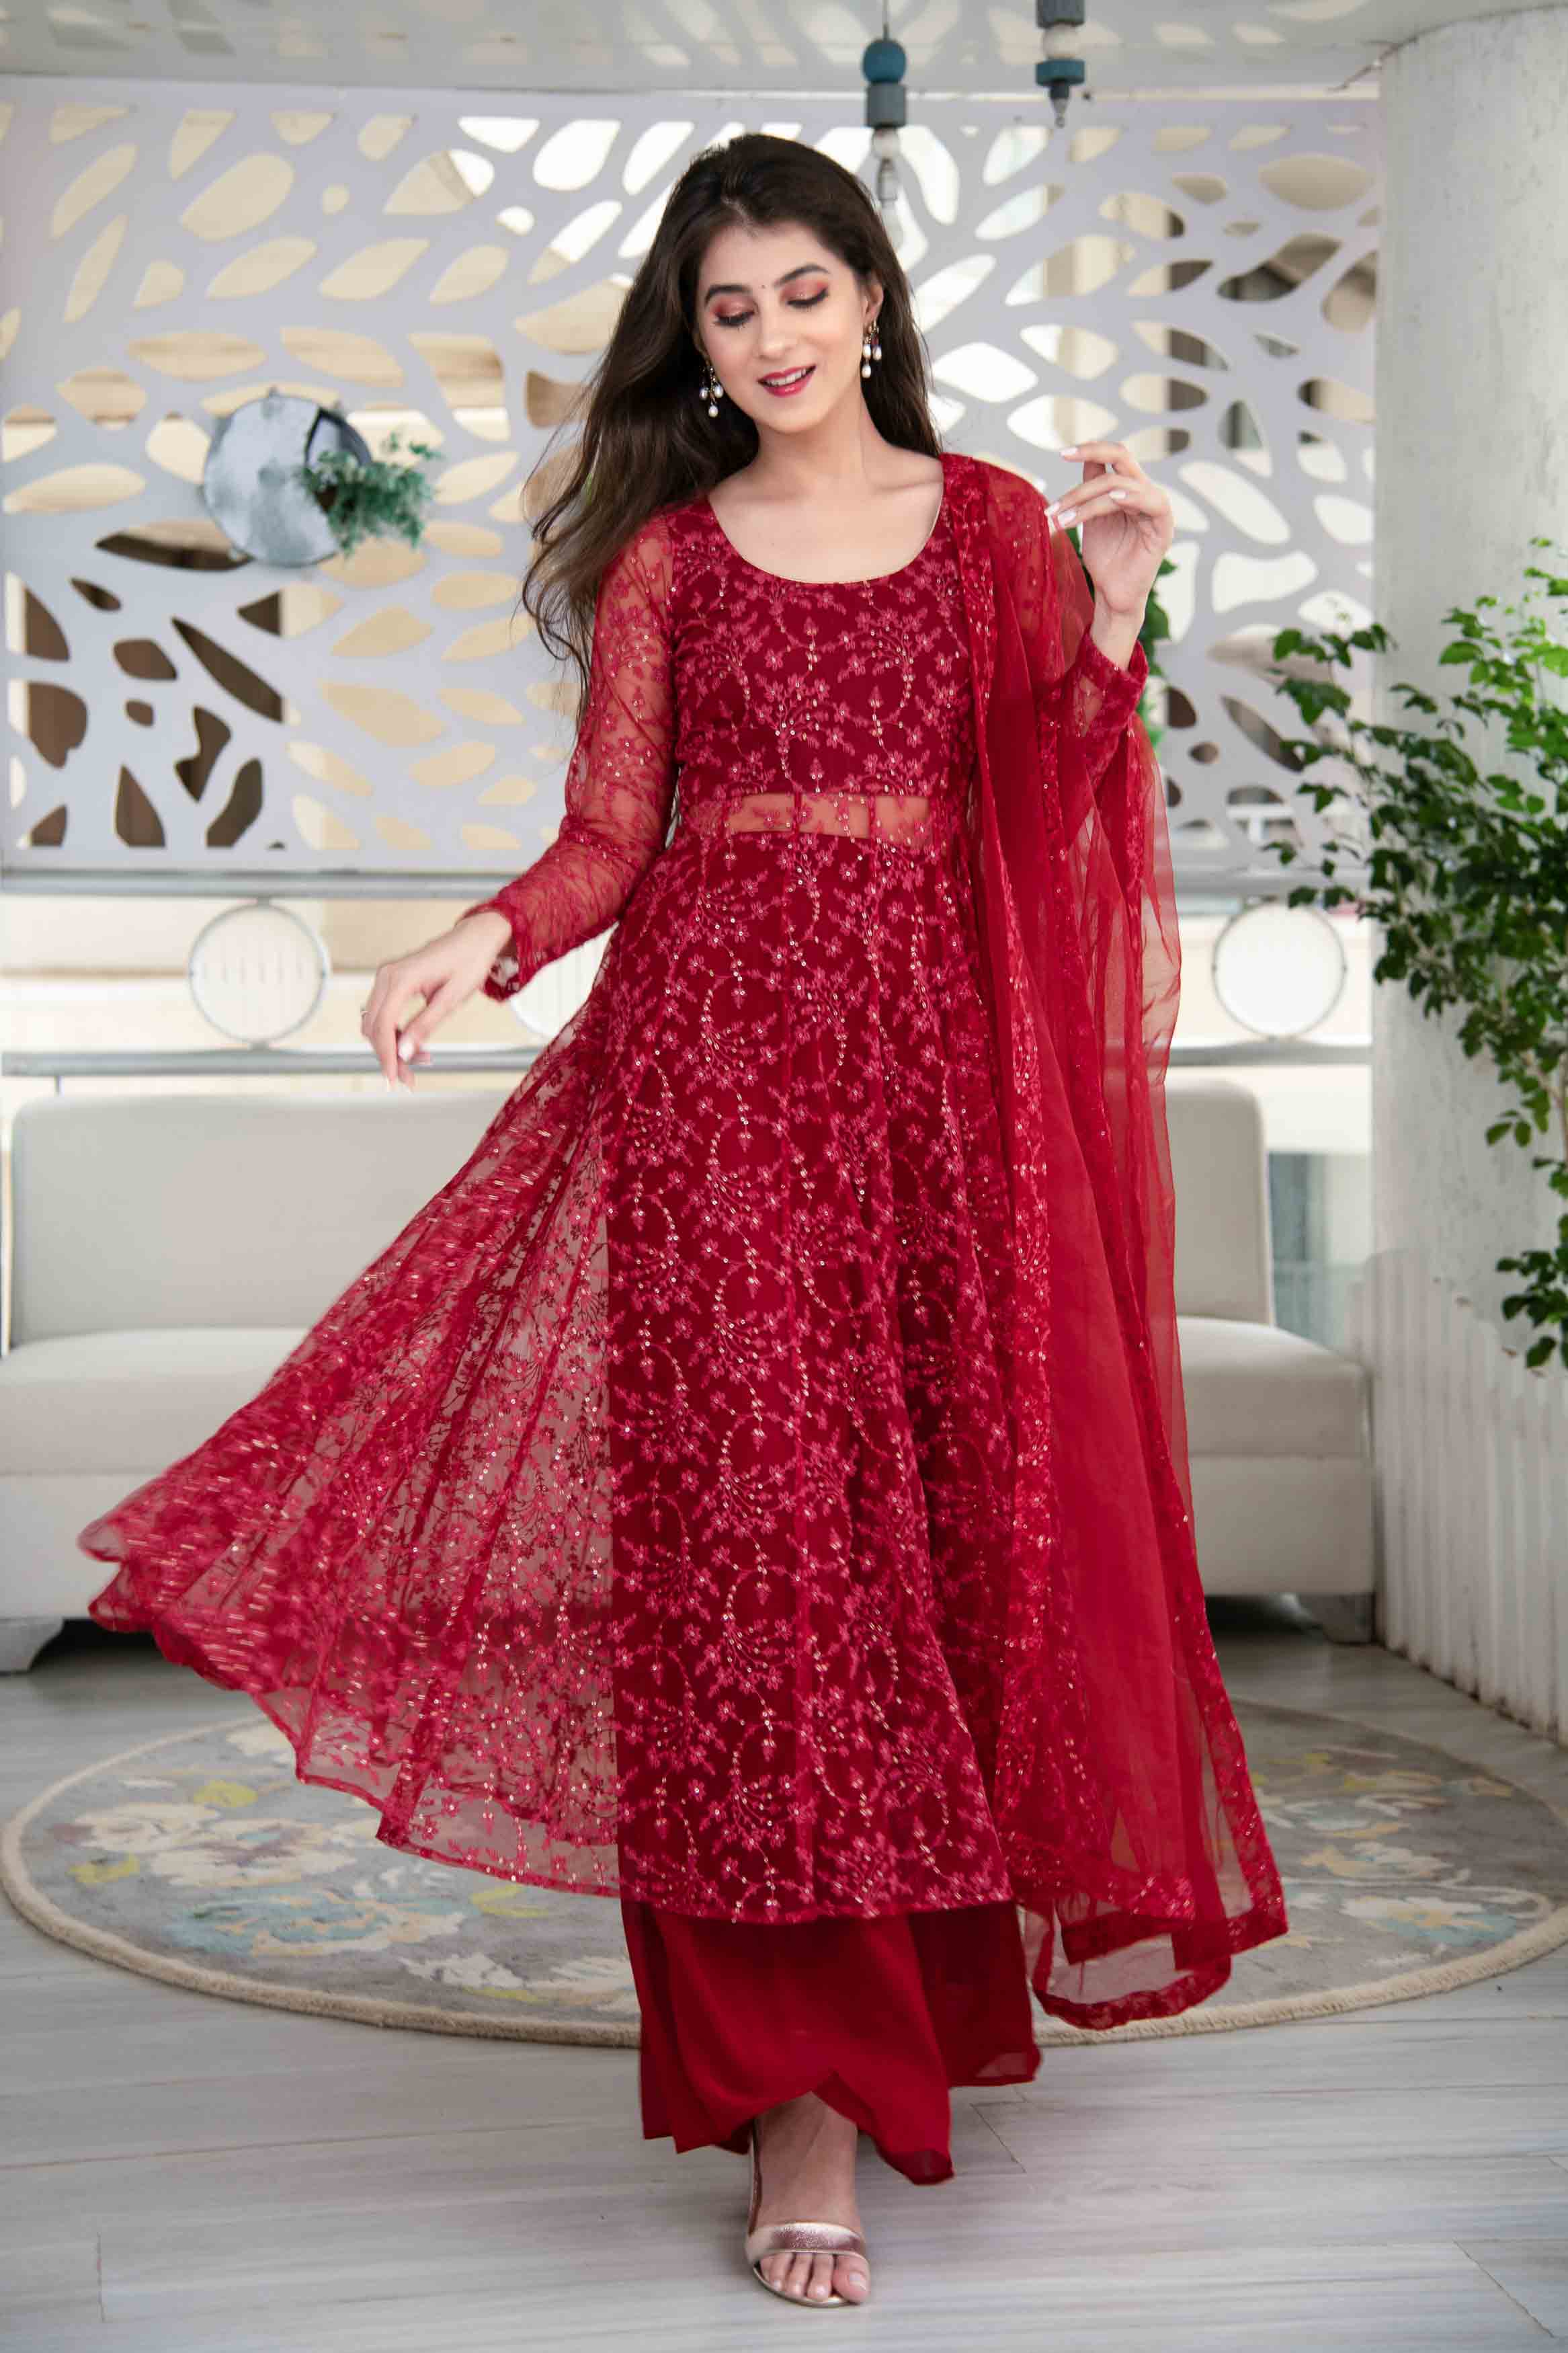 Ladies Frock Suit Stitching Services at Rs 500/piece in Lucknow-nextbuild.com.vn